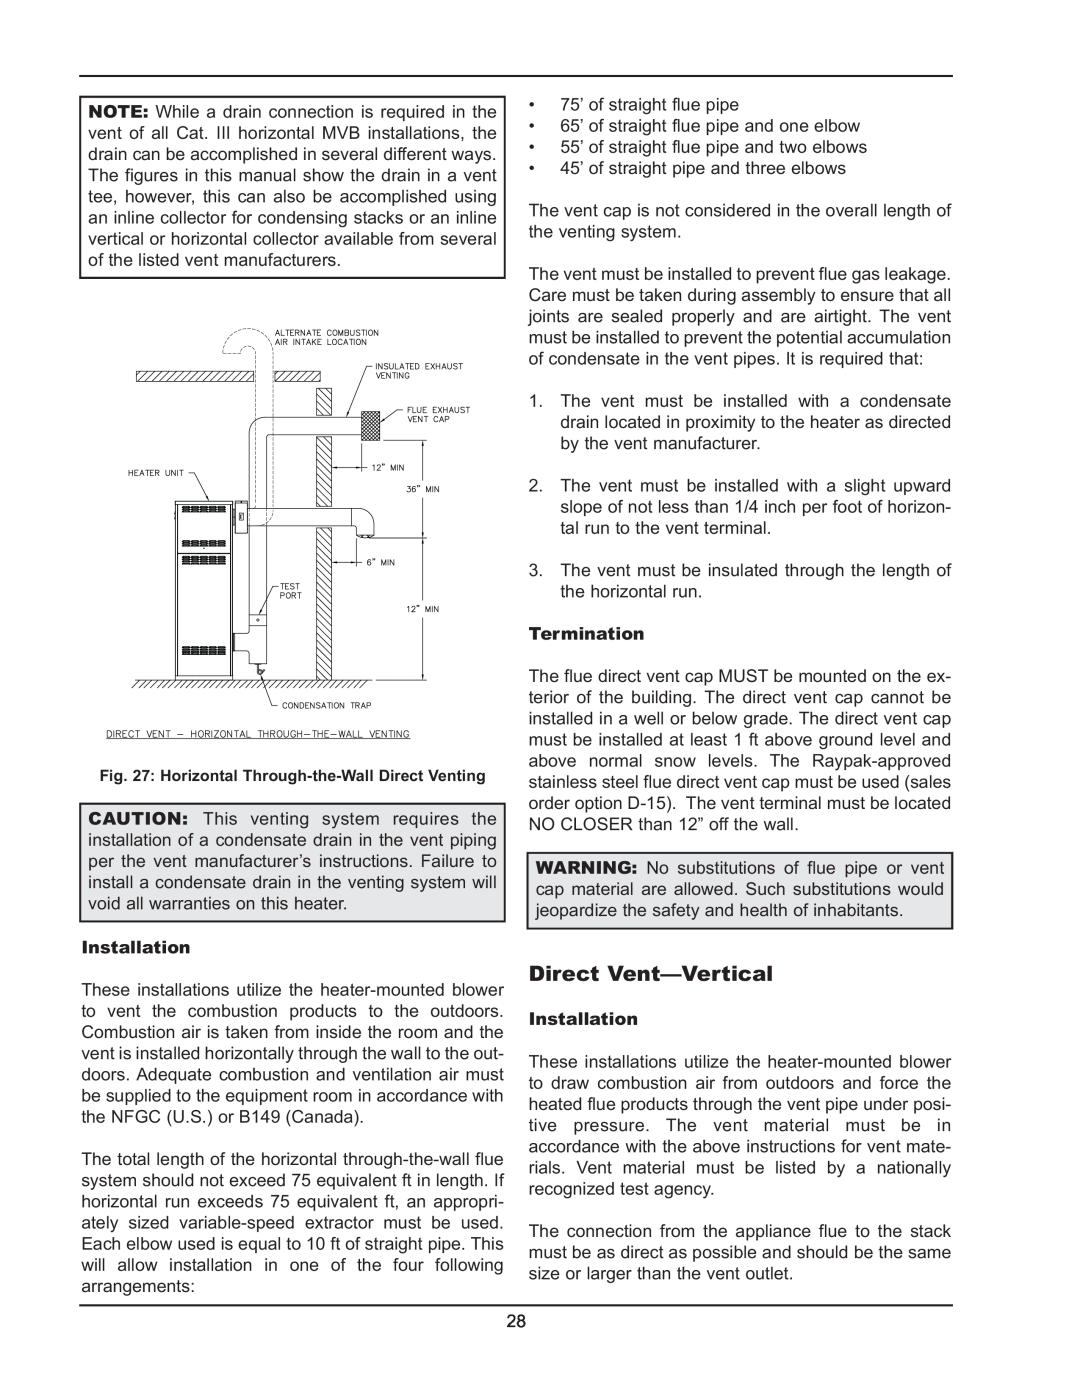 Raypak 5042004 operating instructions Direct Vent—Vertical, Installation, Termination 